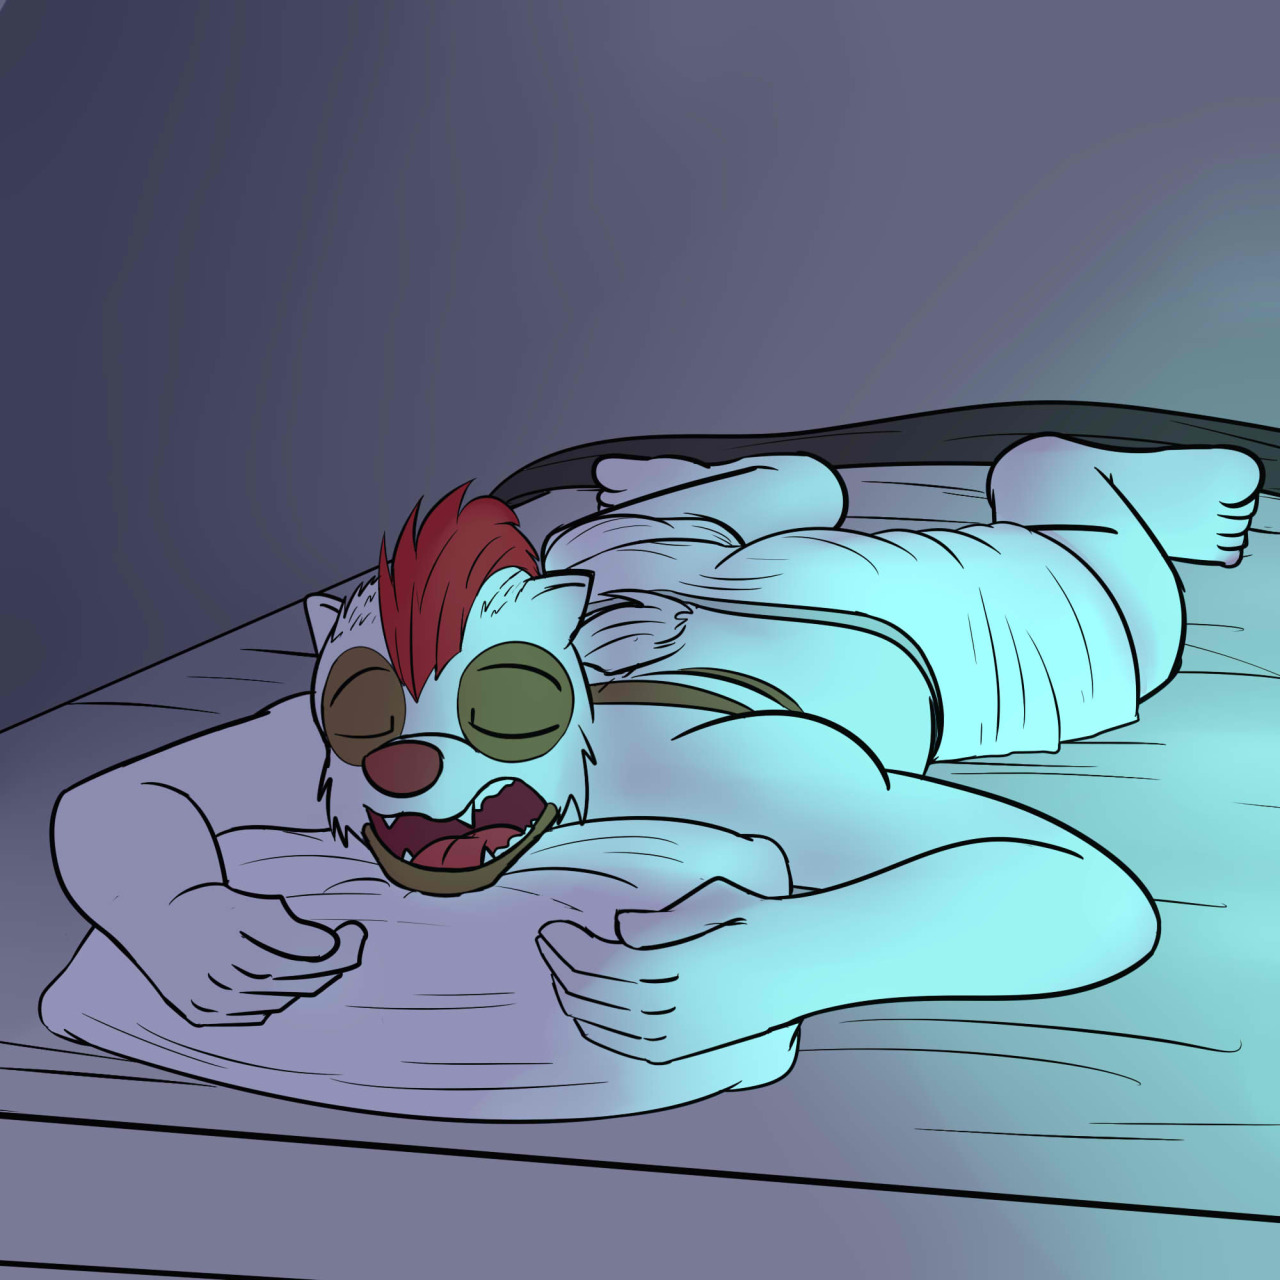 Anthro Vigoroth Sleepin’Looks like this guy is sleepin on the bed the other way